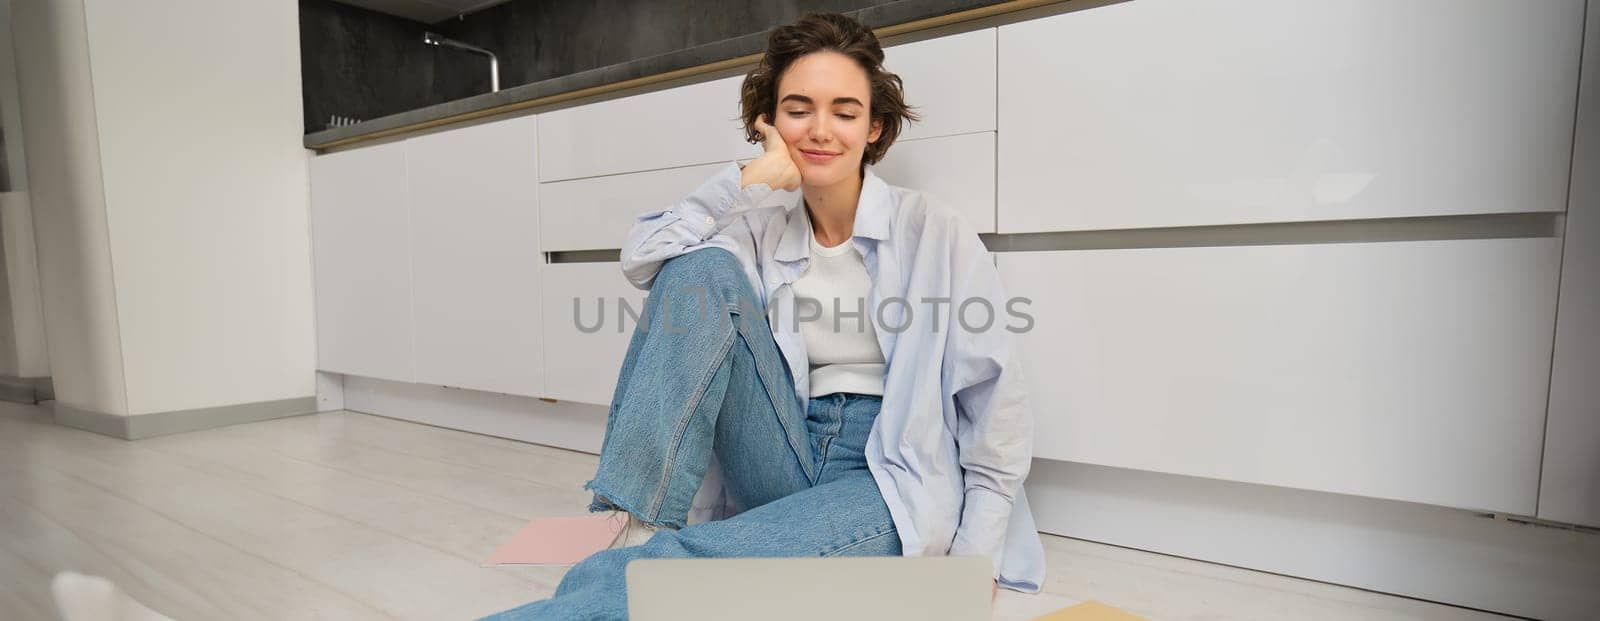 Portrait of smiling young woman watching video on laptop, sitting on kitchen floor and looking at computer screen, connects to online chat. Copy space